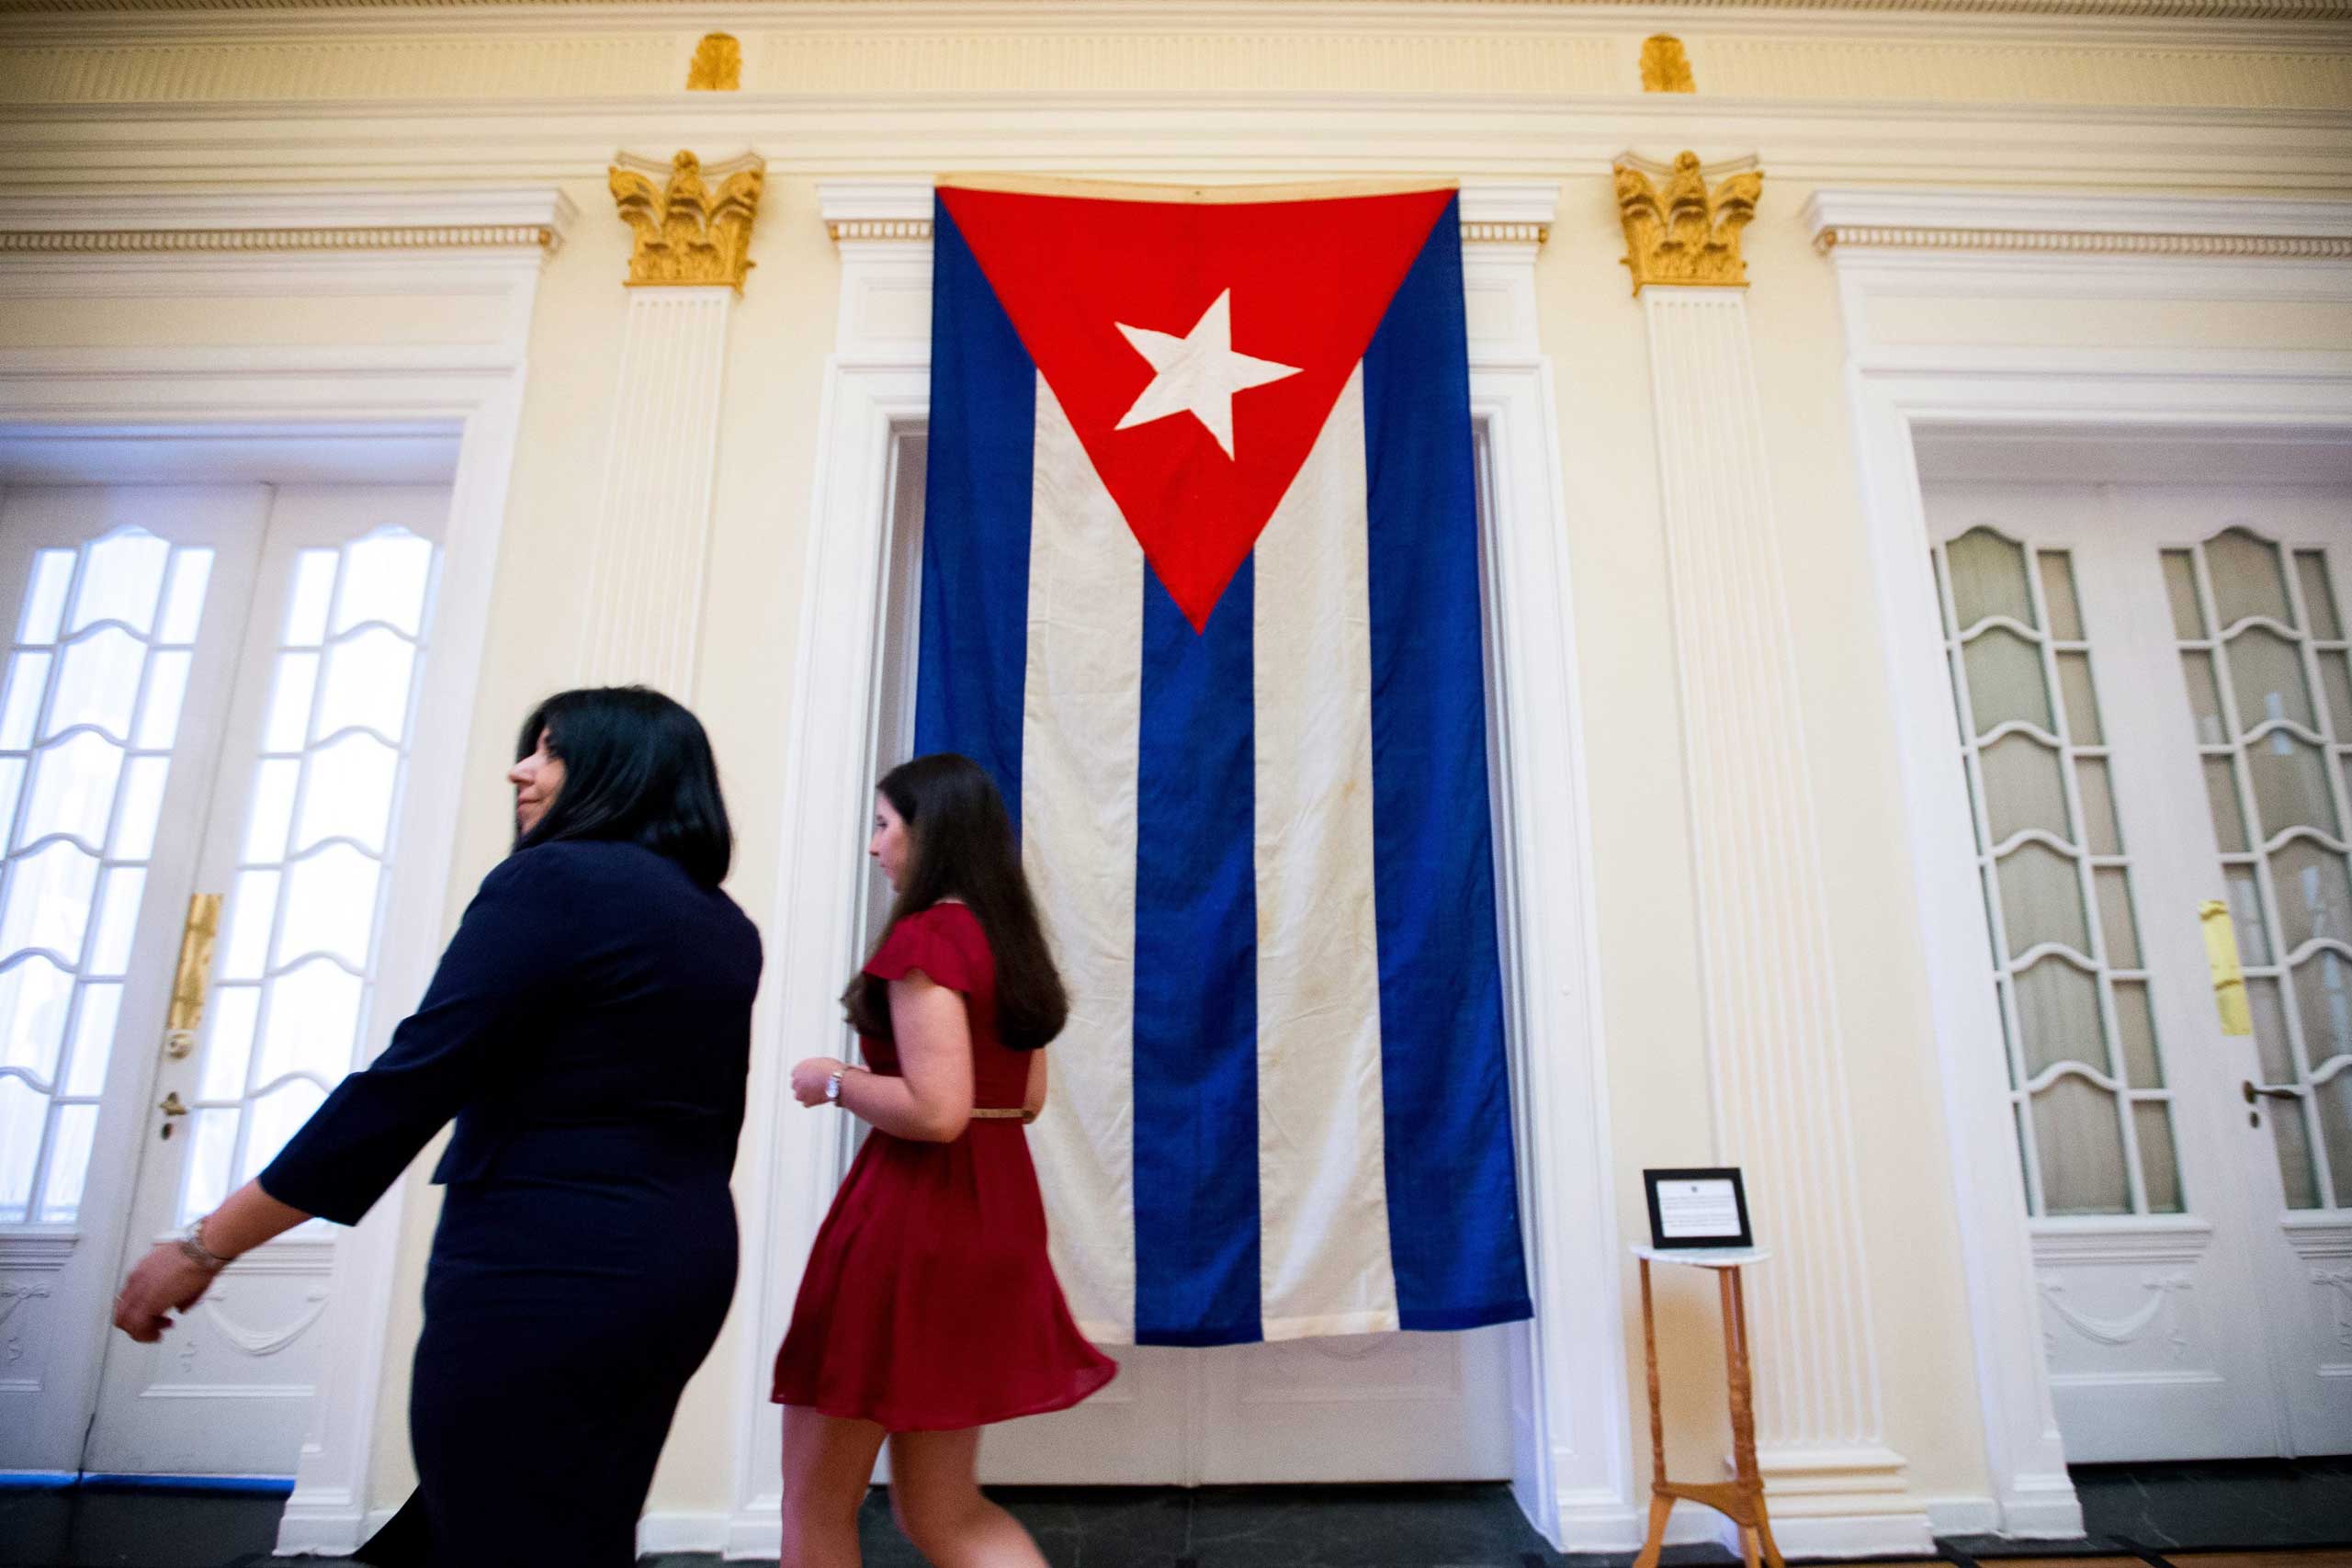 The last Cuban flag that was lowered from the former Cuban Embassy in Washington on January 3, 1961 when relations between the United States and Cuba were severed, hangs in the new Cuban Embassy in Washington on July 20, 2015.